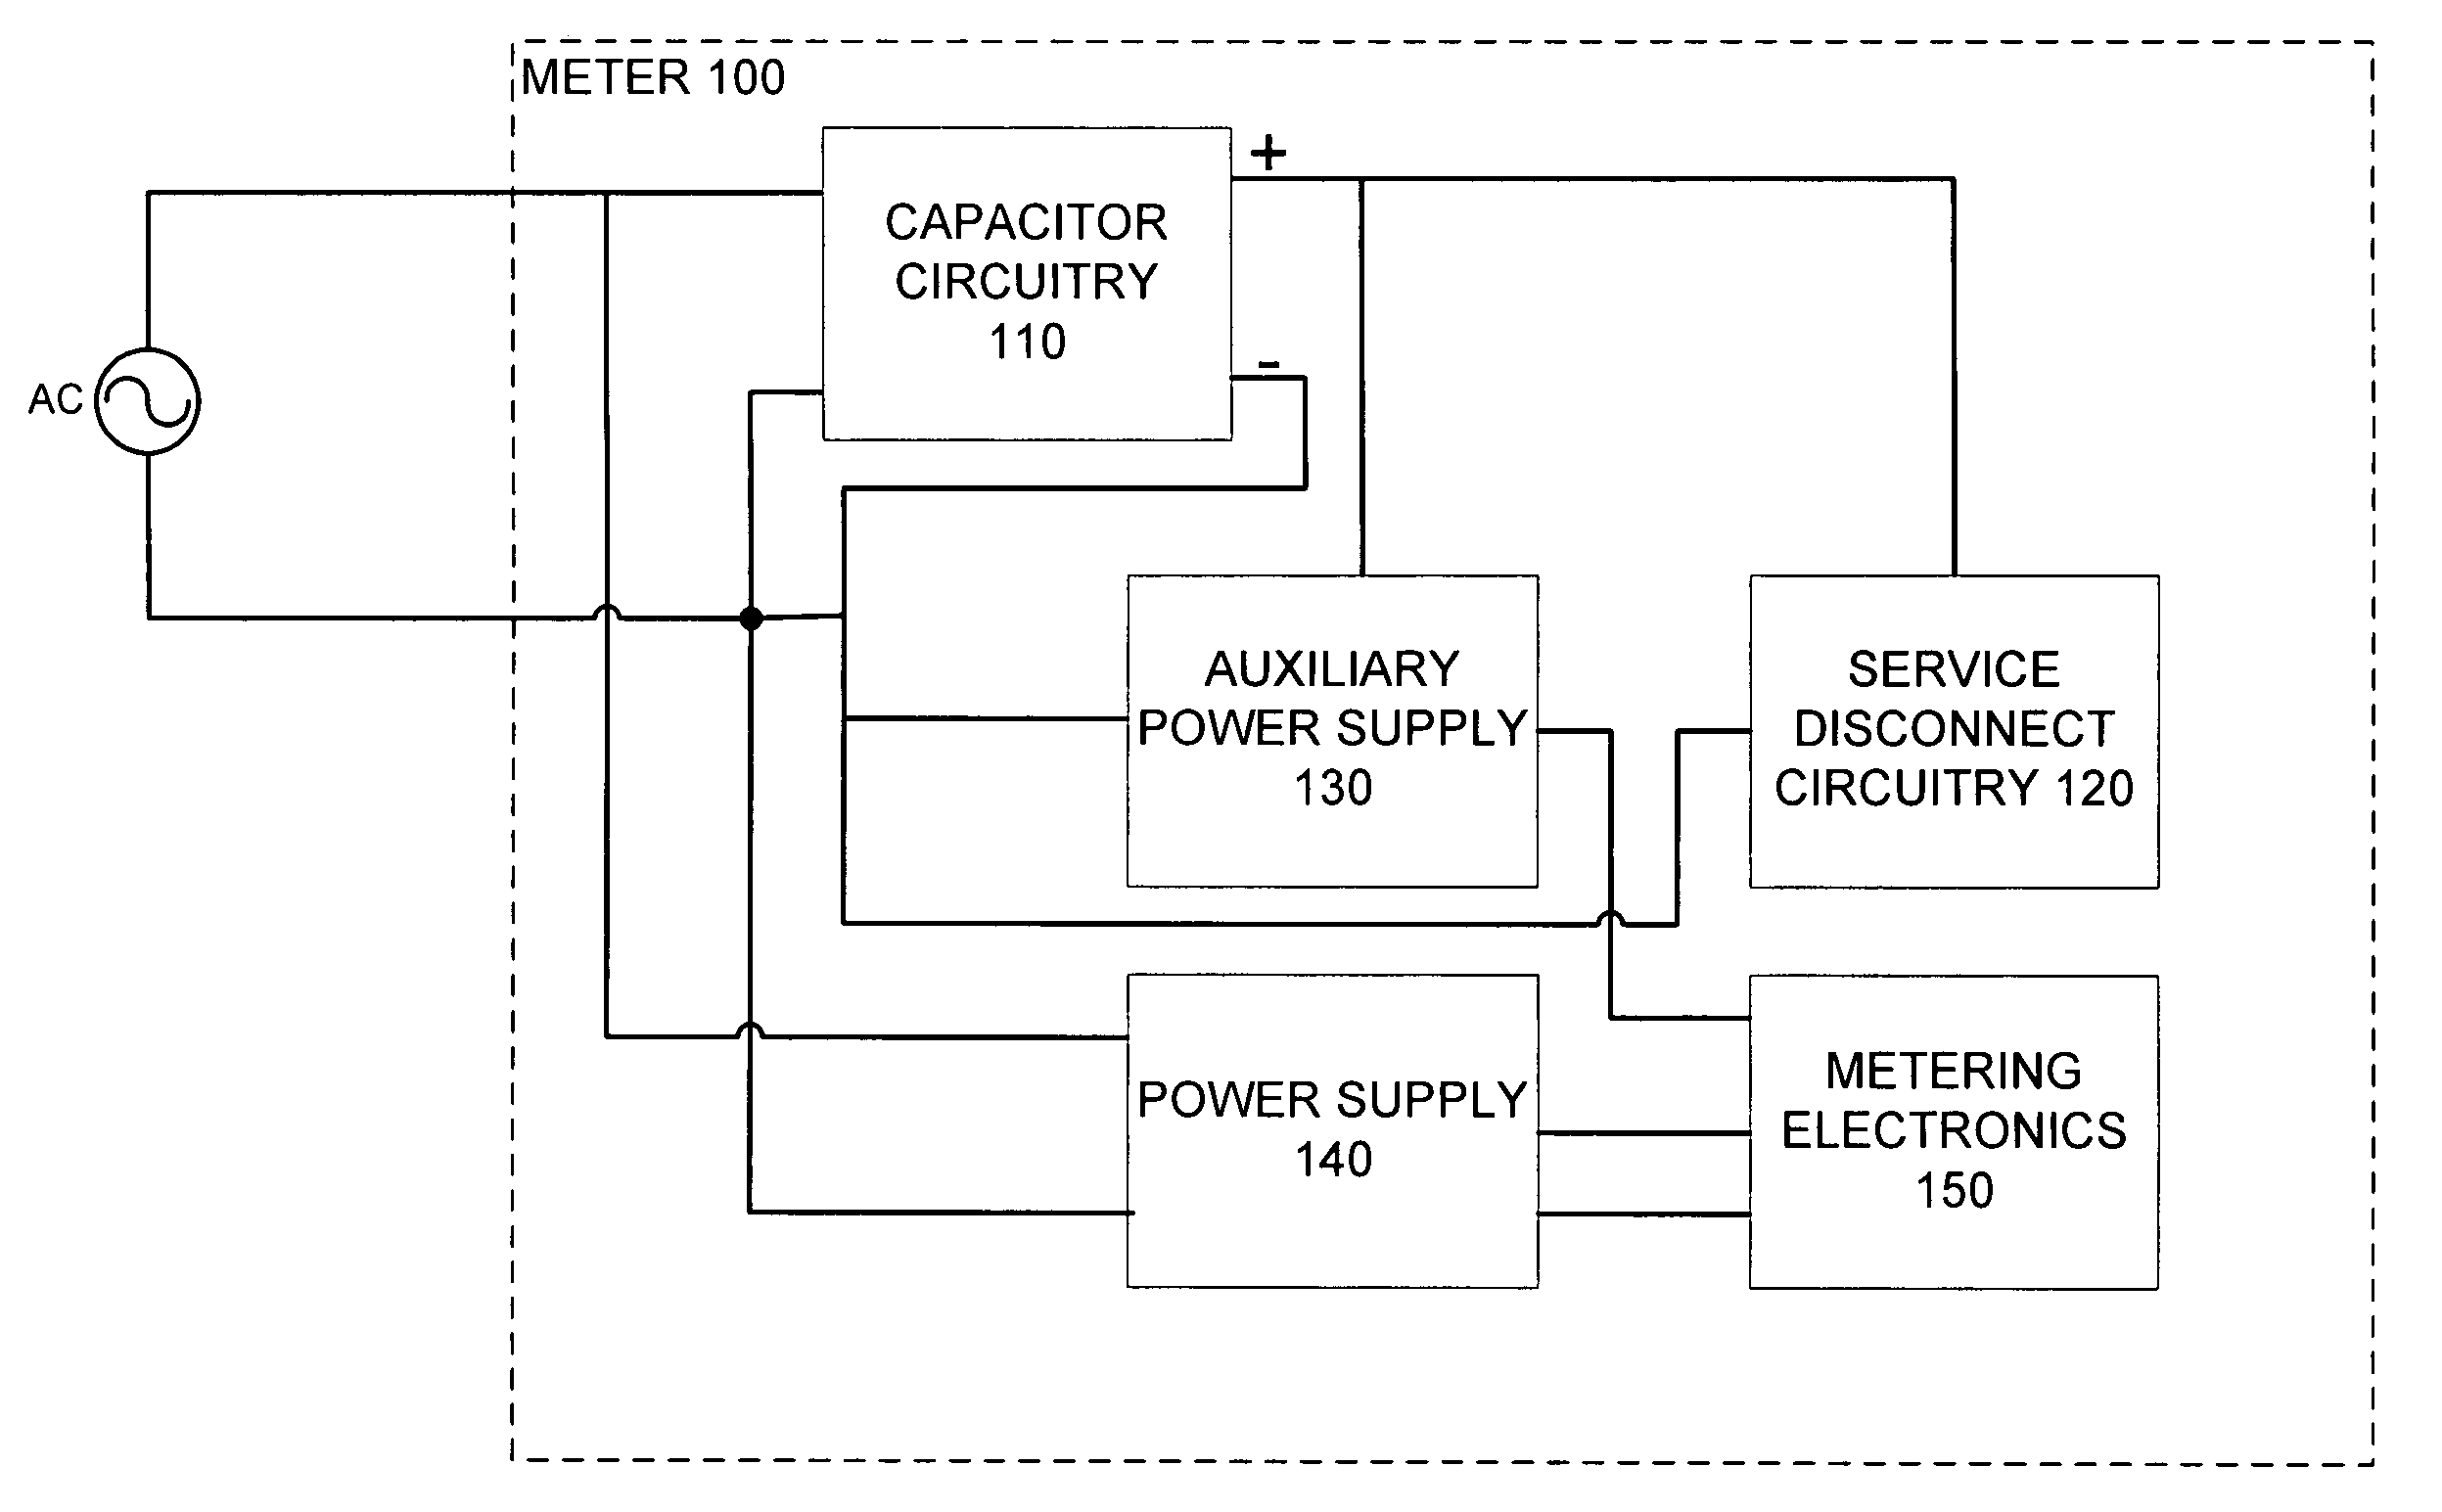 Auxiliary power supply for supplying power to additional functions within a meter